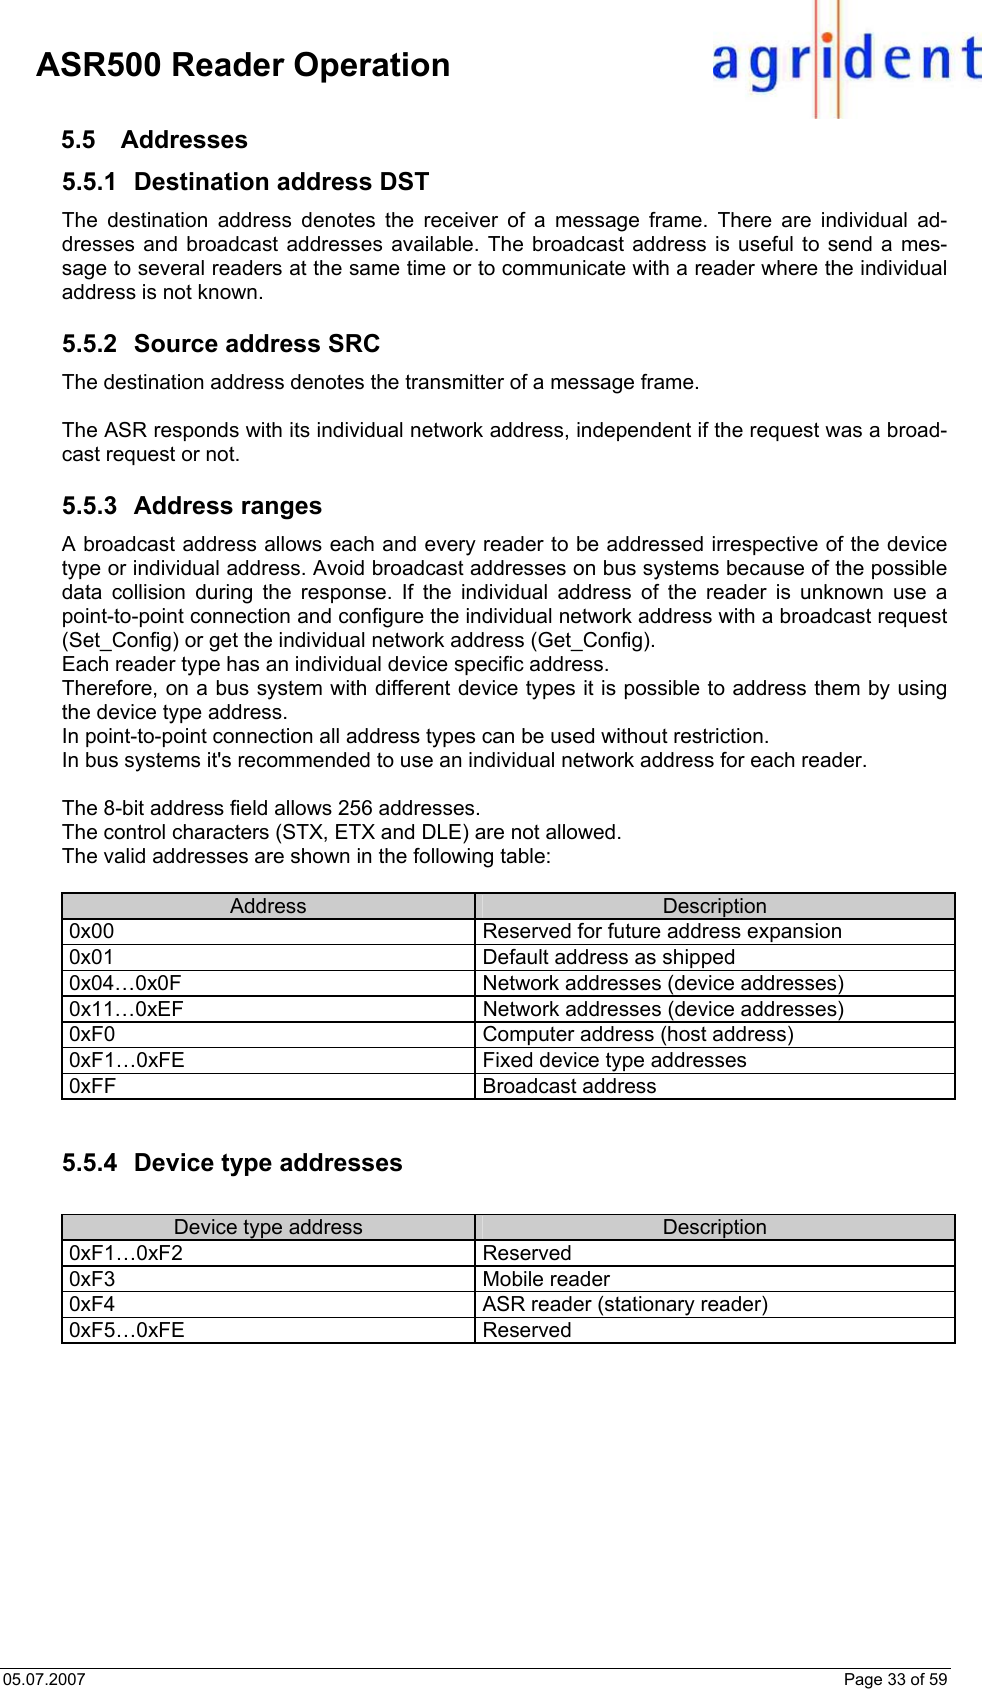 05.07.2007    Page 33 of 59     ASR500 Reader Operation 5.5 Addresses 5.5.1  Destination address DST The destination address denotes the receiver of a message frame. There are individual ad-dresses and broadcast addresses available. The broadcast address is useful to send a mes-sage to several readers at the same time or to communicate with a reader where the individual address is not known.  5.5.2  Source address SRC The destination address denotes the transmitter of a message frame.  The ASR responds with its individual network address, independent if the request was a broad-cast request or not.   5.5.3 Address ranges A broadcast address allows each and every reader to be addressed irrespective of the device type or individual address. Avoid broadcast addresses on bus systems because of the possible data collision during the response. If the individual address of the reader is unknown use a point-to-point connection and configure the individual network address with a broadcast request (Set_Config) or get the individual network address (Get_Config). Each reader type has an individual device specific address. Therefore, on a bus system with different device types it is possible to address them by using the device type address. In point-to-point connection all address types can be used without restriction. In bus systems it&apos;s recommended to use an individual network address for each reader.  The 8-bit address field allows 256 addresses. The control characters (STX, ETX and DLE) are not allowed. The valid addresses are shown in the following table:  Address  Description 0x00  Reserved for future address expansion 0x01  Default address as shipped 0x04…0x0F  Network addresses (device addresses) 0x11…0xEF  Network addresses (device addresses) 0xF0  Computer address (host address) 0xF1…0xFE  Fixed device type addresses 0xFF Broadcast address   5.5.4  Device type addresses  Device type address  Description 0xF1…0xF2 Reserved 0xF3 Mobile reader 0xF4  ASR reader (stationary reader) 0xF5…0xFE Reserved  